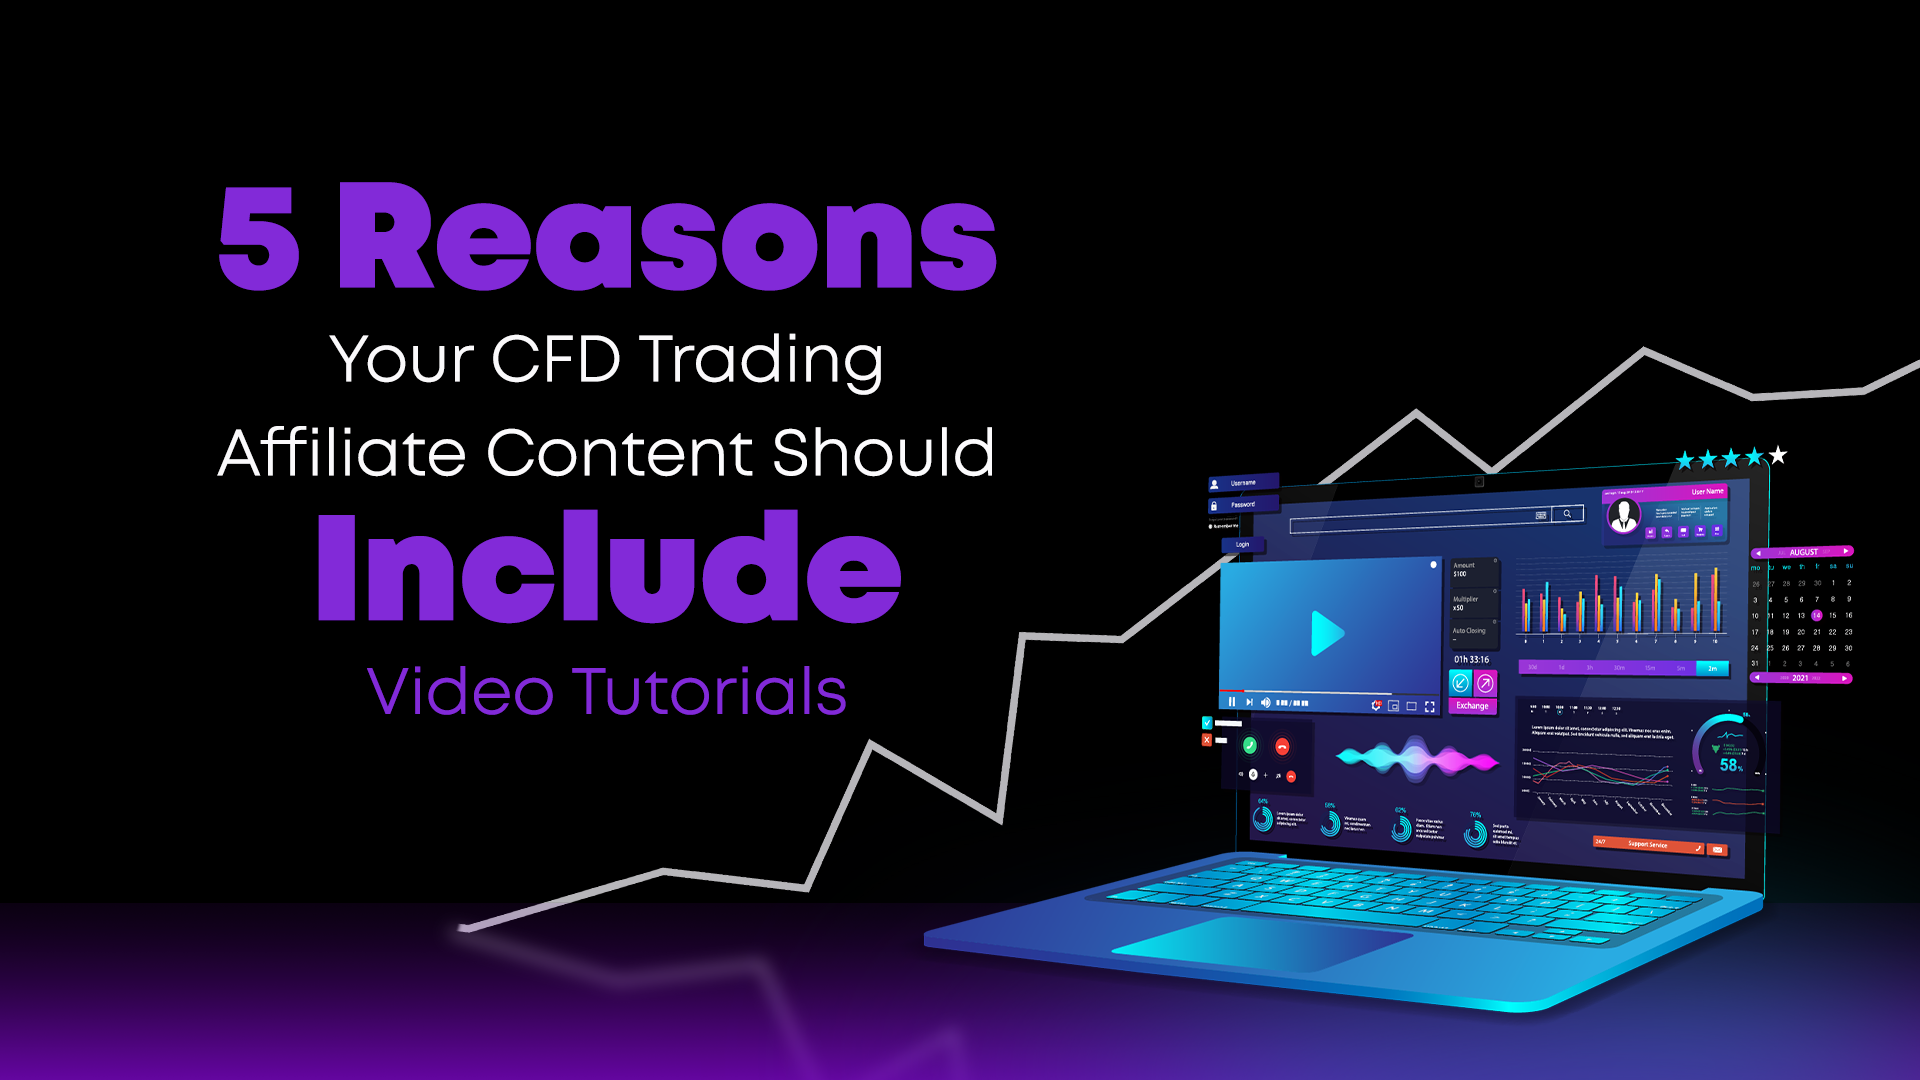 5 Reasons Your CFD Trading Affiliate Content Should Include Video Tutorials